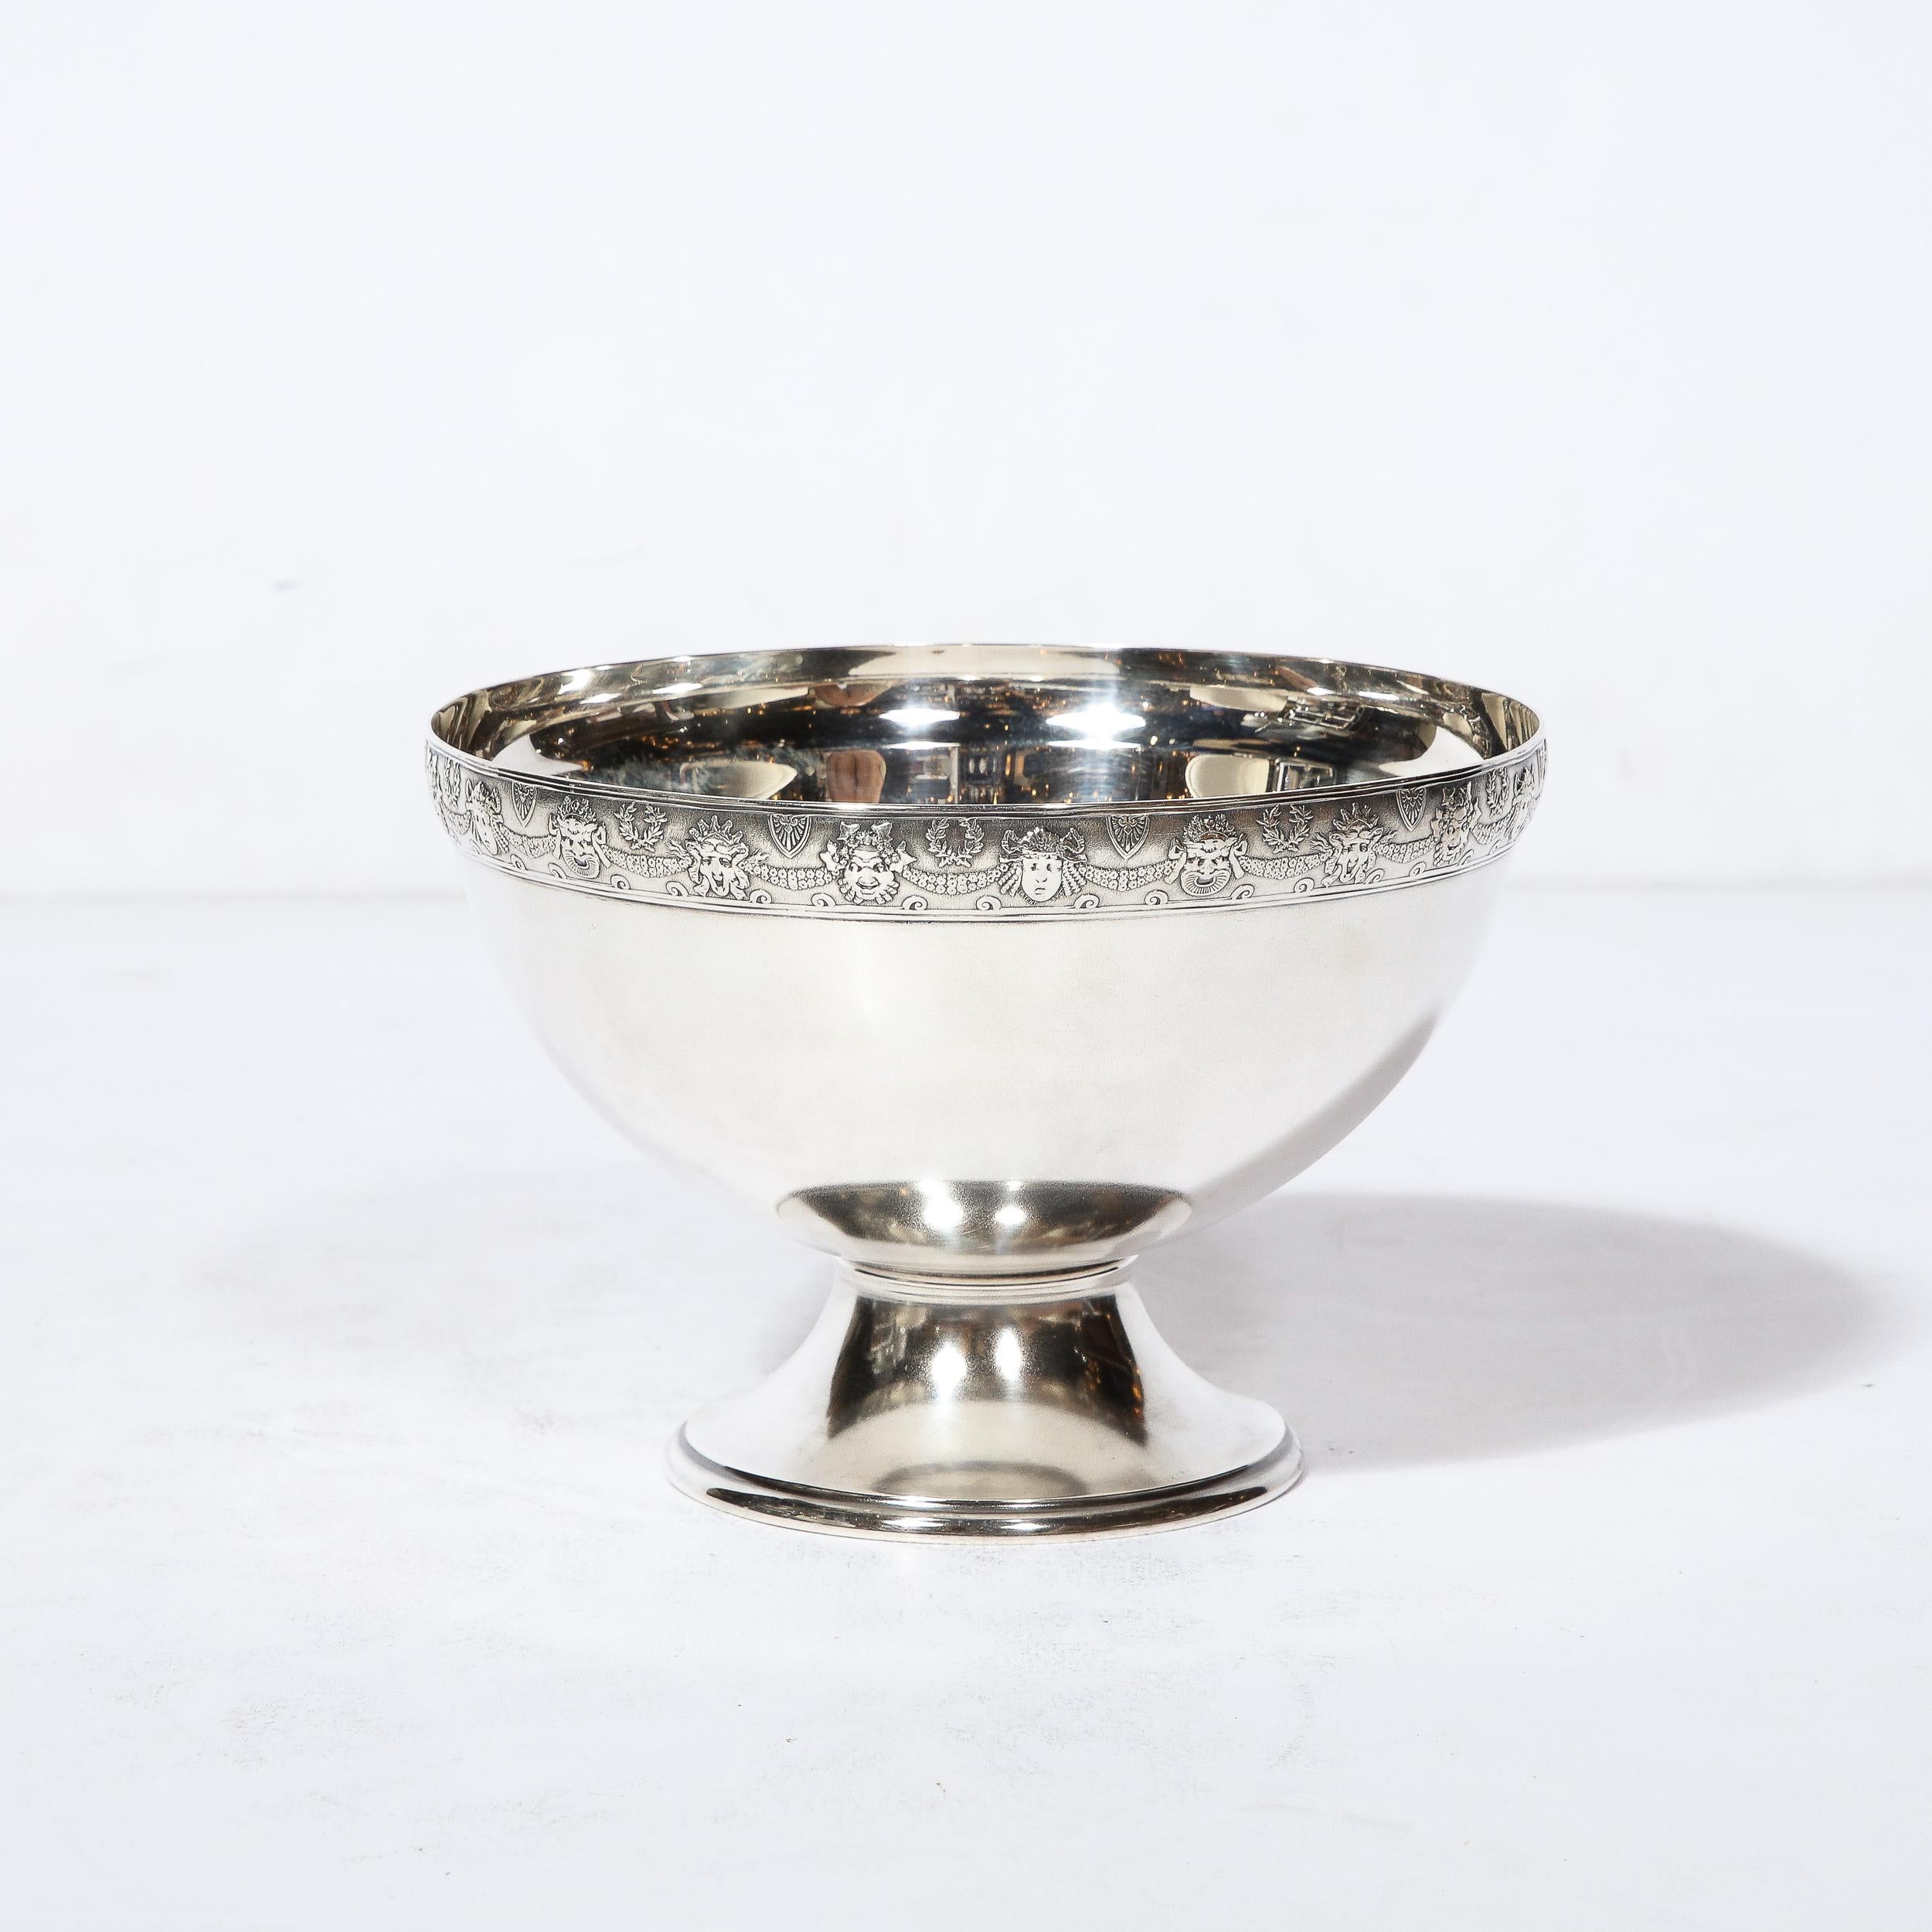 This exquisite  and highly sophisticated Art Deco Sterling Silver Serving Bowl was made by J.E. Caldwell and originates from the United States, Circa 1930. A truly special piece rendered in gleaming Sterling Silver, this bowl rests on a round